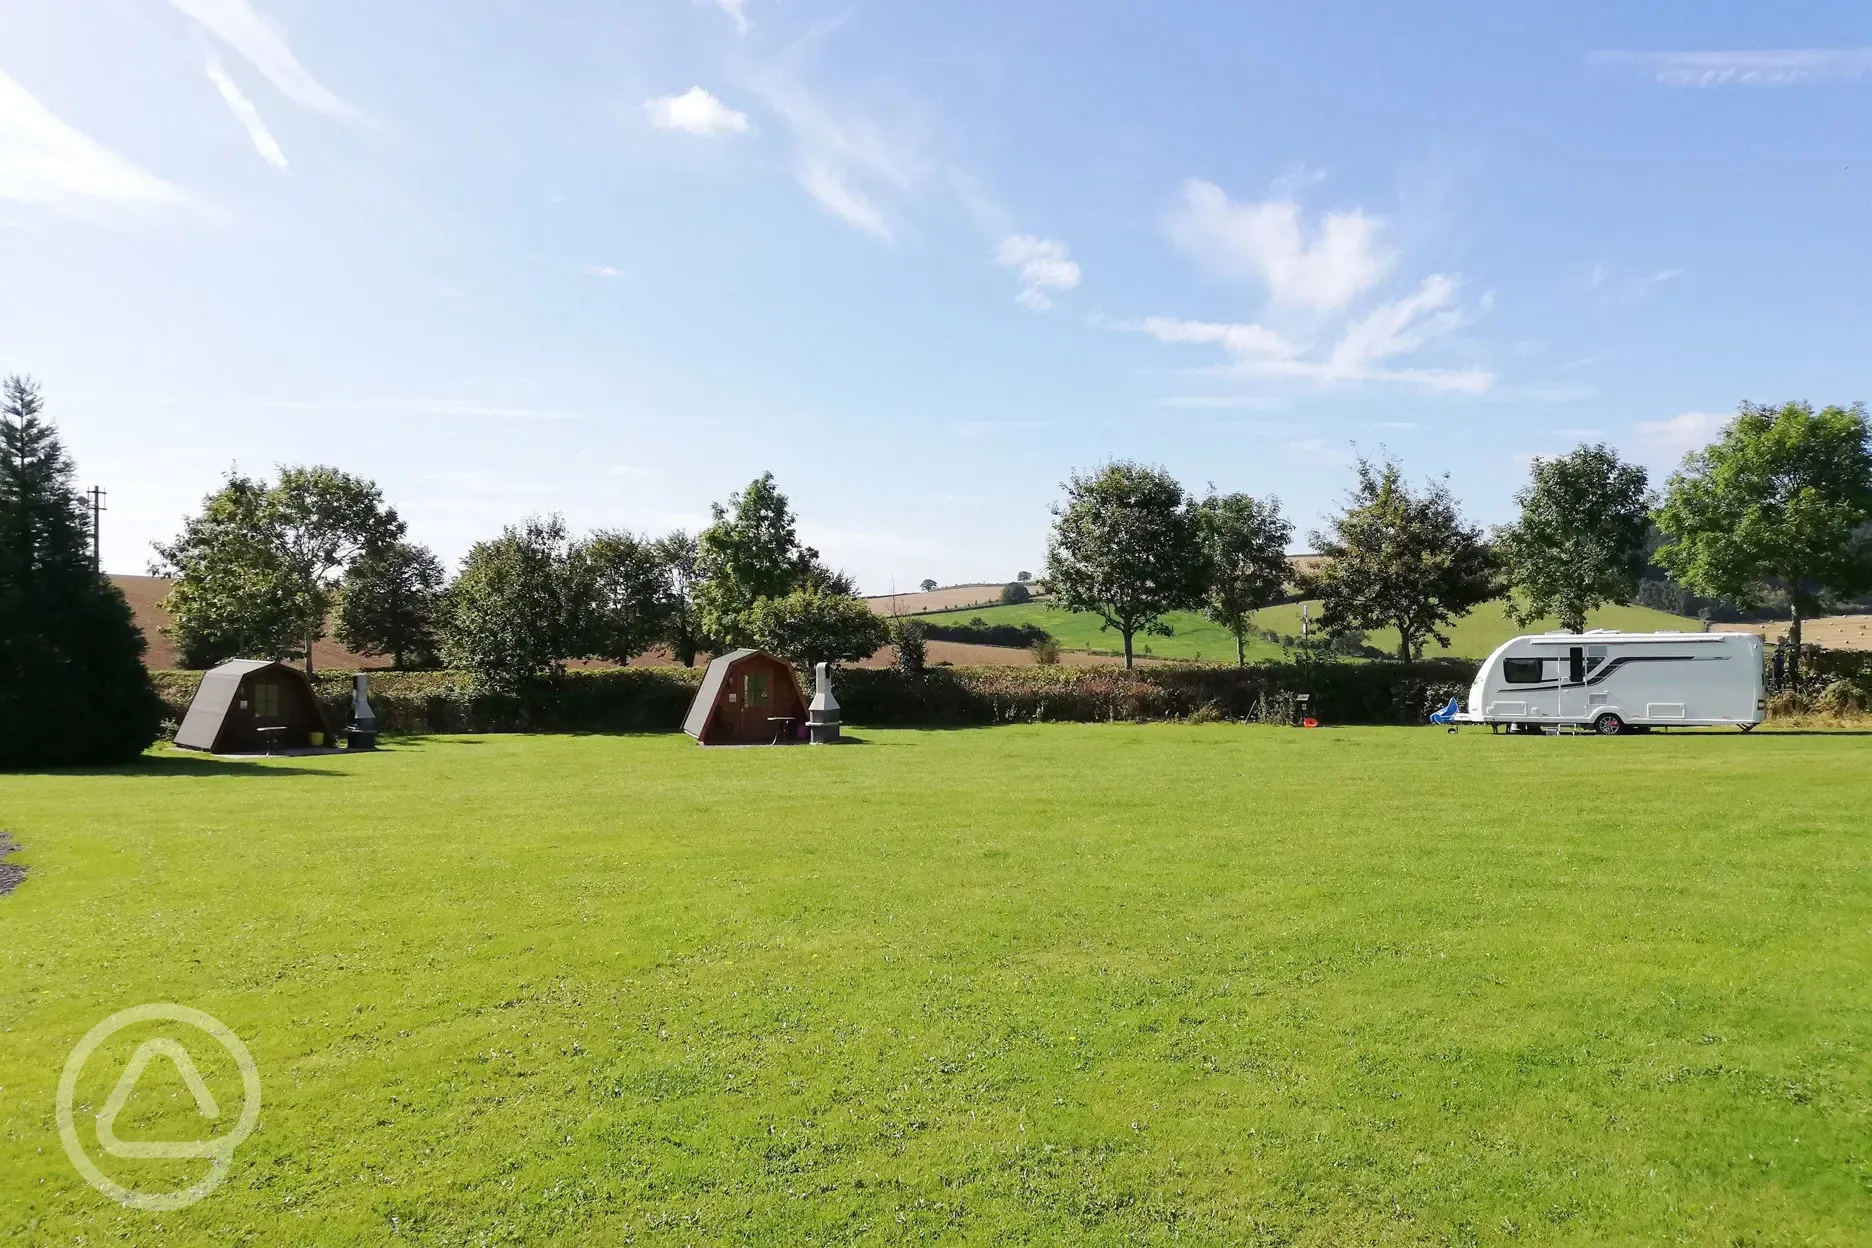 Grass pitches and glamping pods